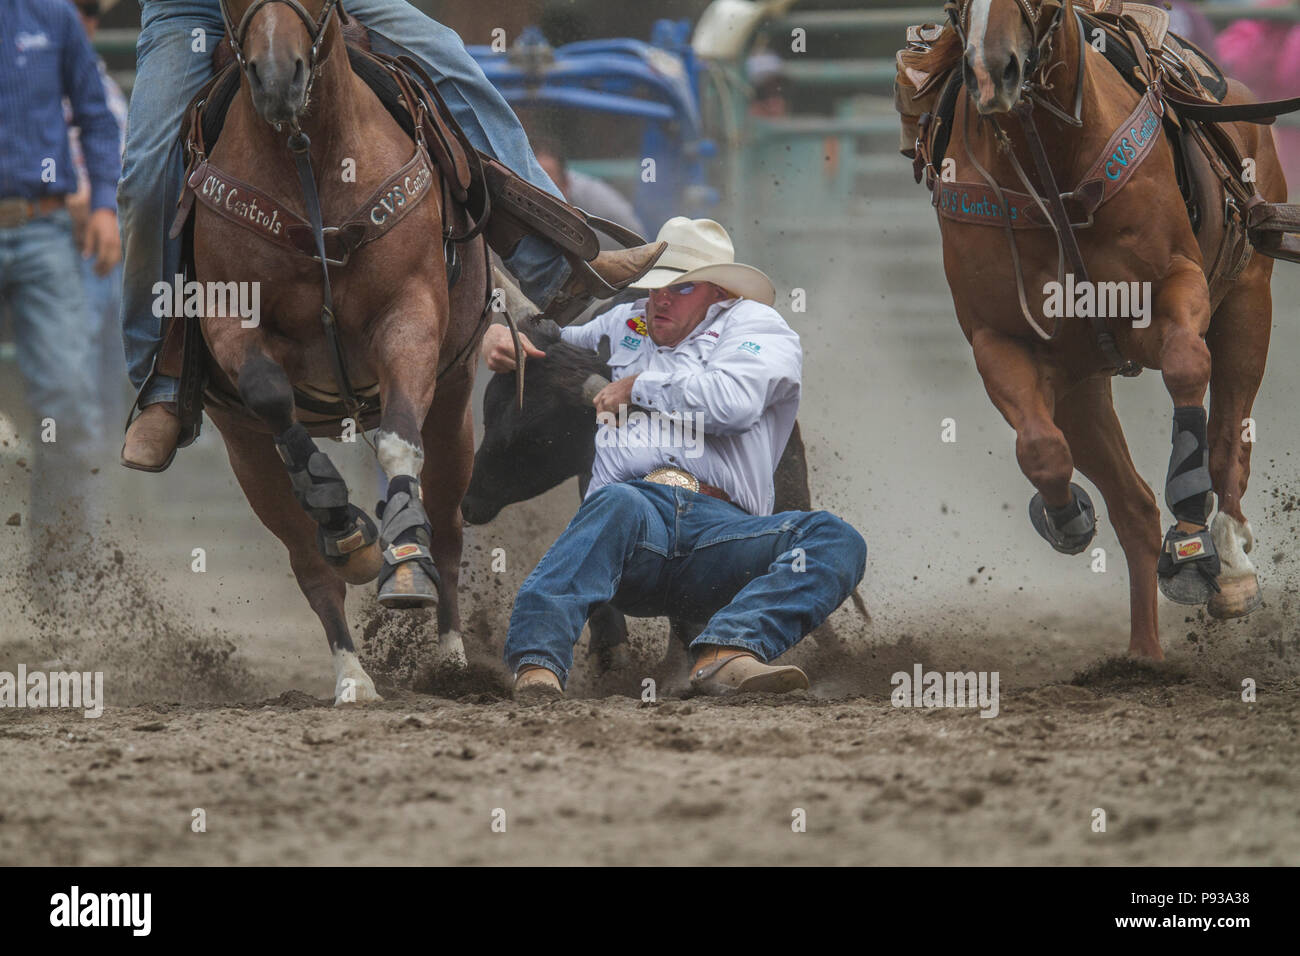 Steer Wrestling, get down and in the dirt. Exciting rodeo event, man vs steer. Action packed, jumps from movng horse to wrestle steer to ground. Travi Stock Photo